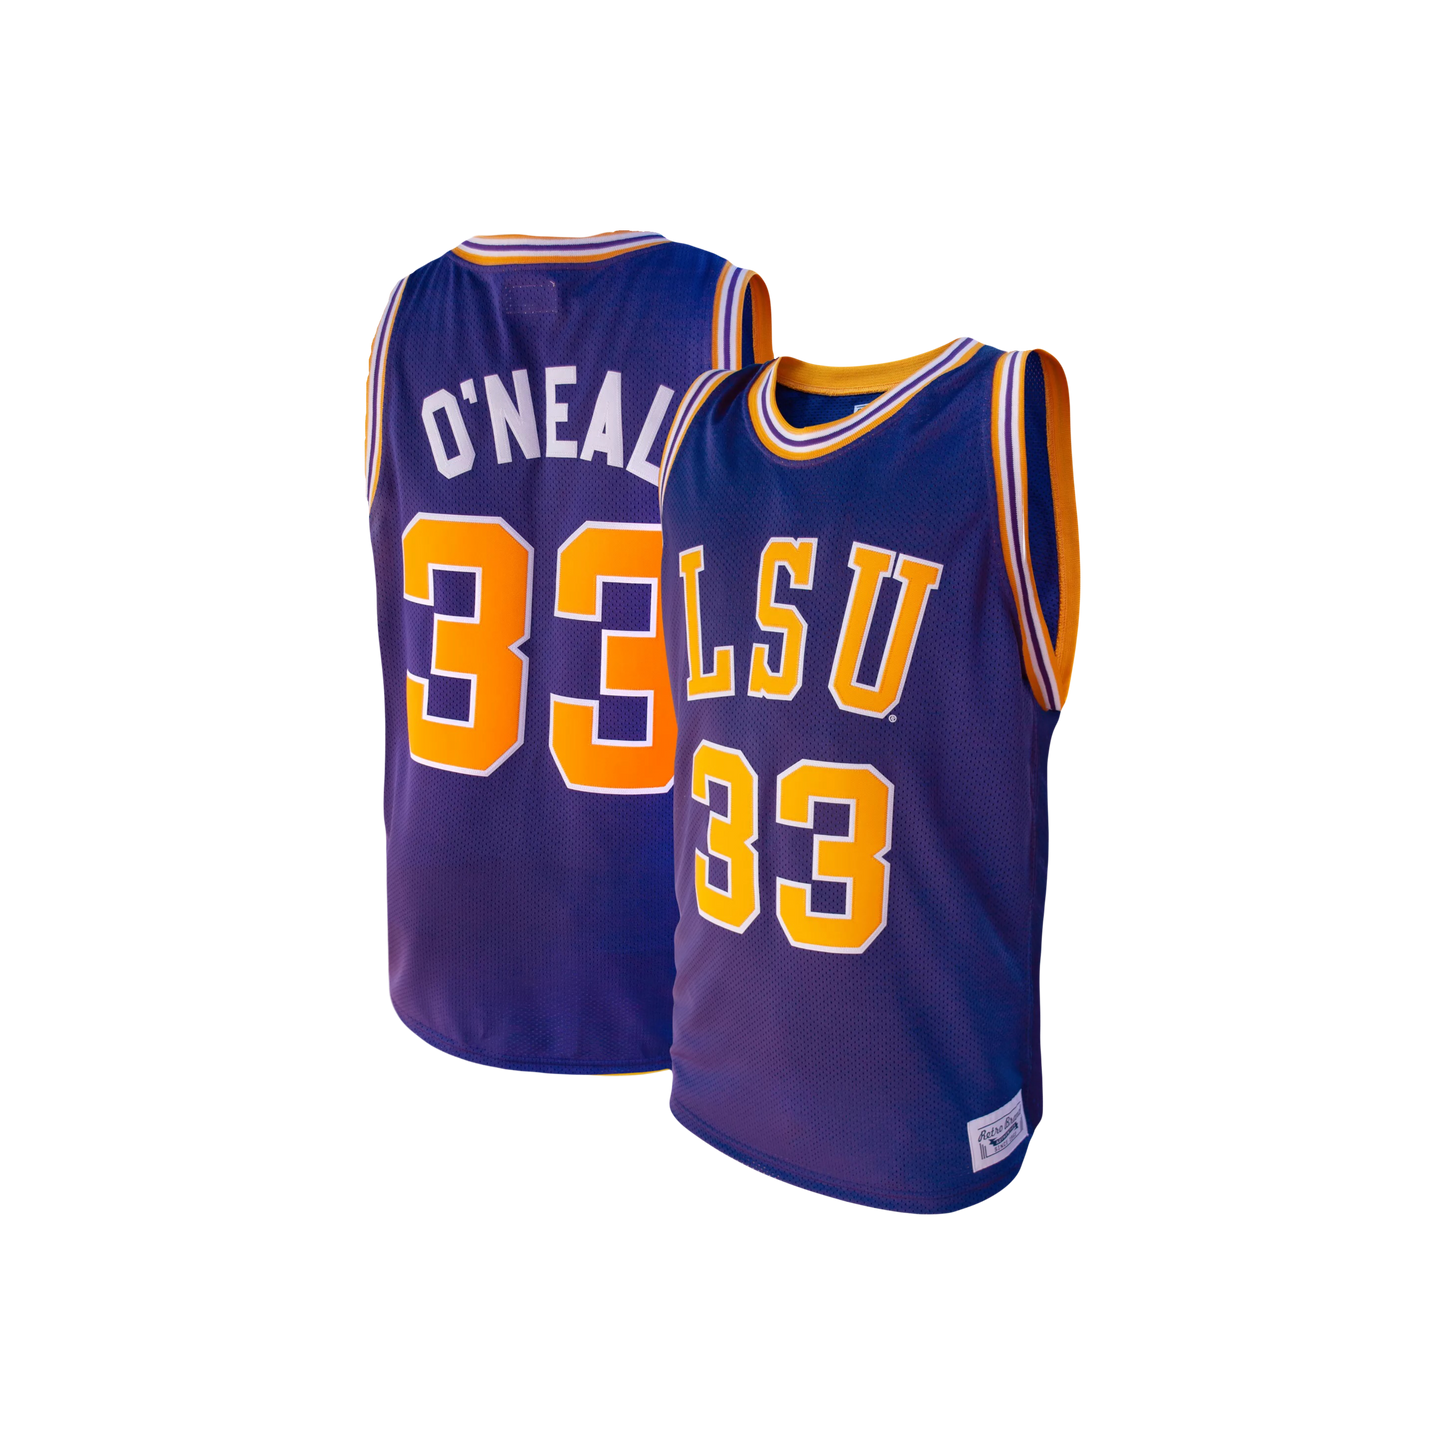 LSU Tigers Shaquille O’Neal 1990 Mitchell & Ness NCAA College Basketball Campus Legends Jersey